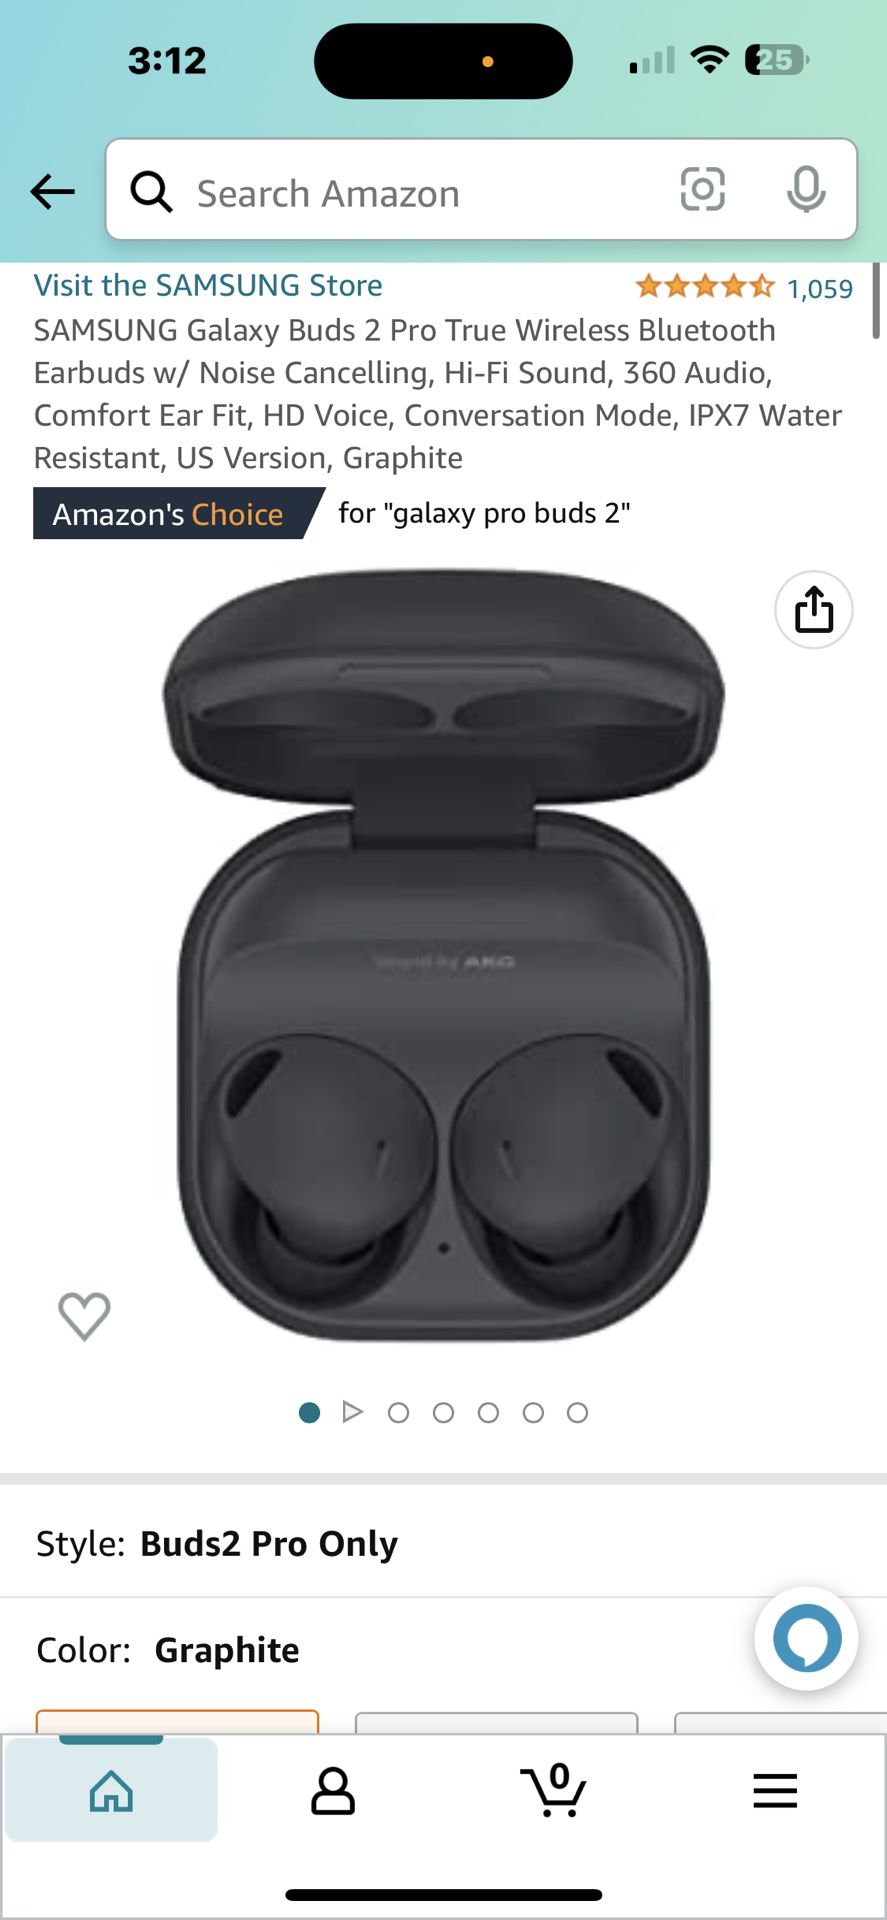  SAMSUNG Galaxy Buds 2 Pro True Wireless Bluetooth Earbuds,  Noise Cancelling, Hi-Fi Sound, 360 Audio, Comfort In Ear Fit, HD Voice,  Conversation Mode, IPX7 Water Resistant, US Version, Bora Purple 